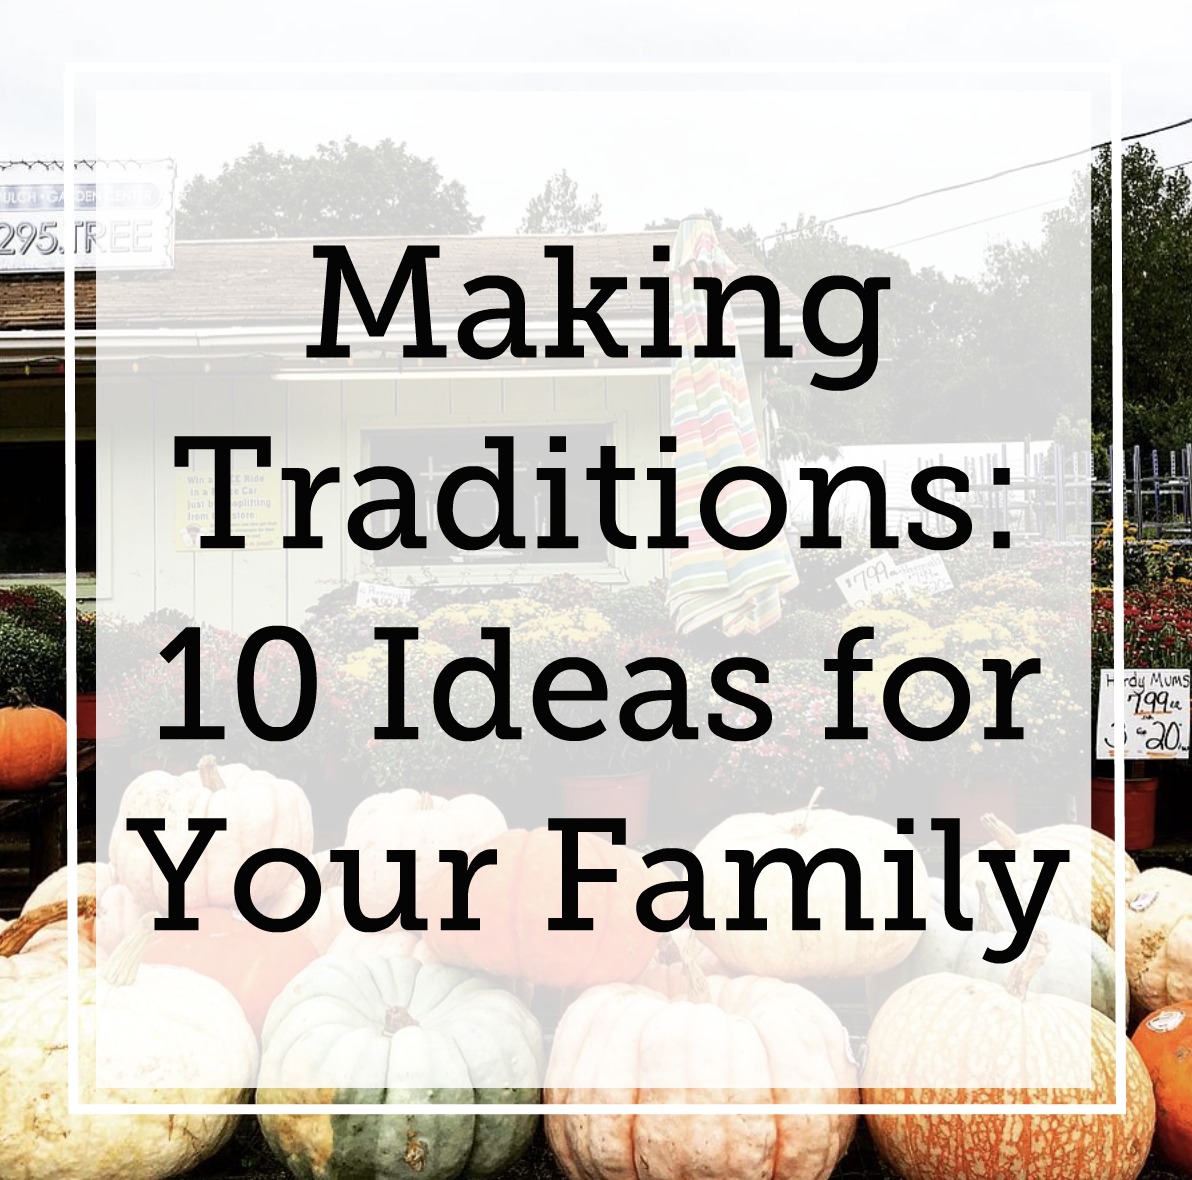 Making Traditions: 10 Ideas for Your Family